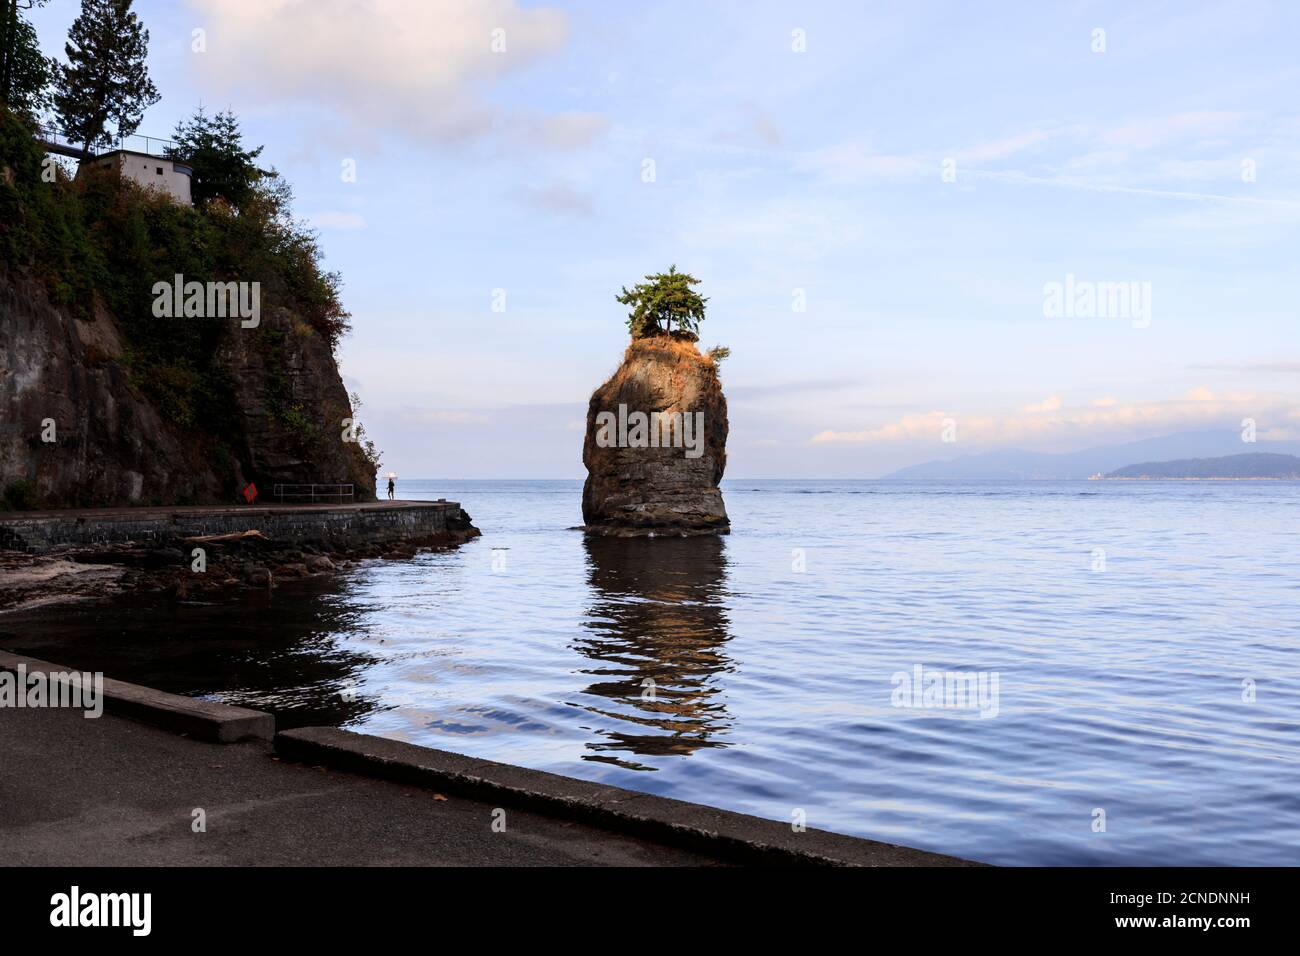 Siwash Rock and Stanley Park Seawall, Vancouver City, British Columbia, Canada Stock Photo